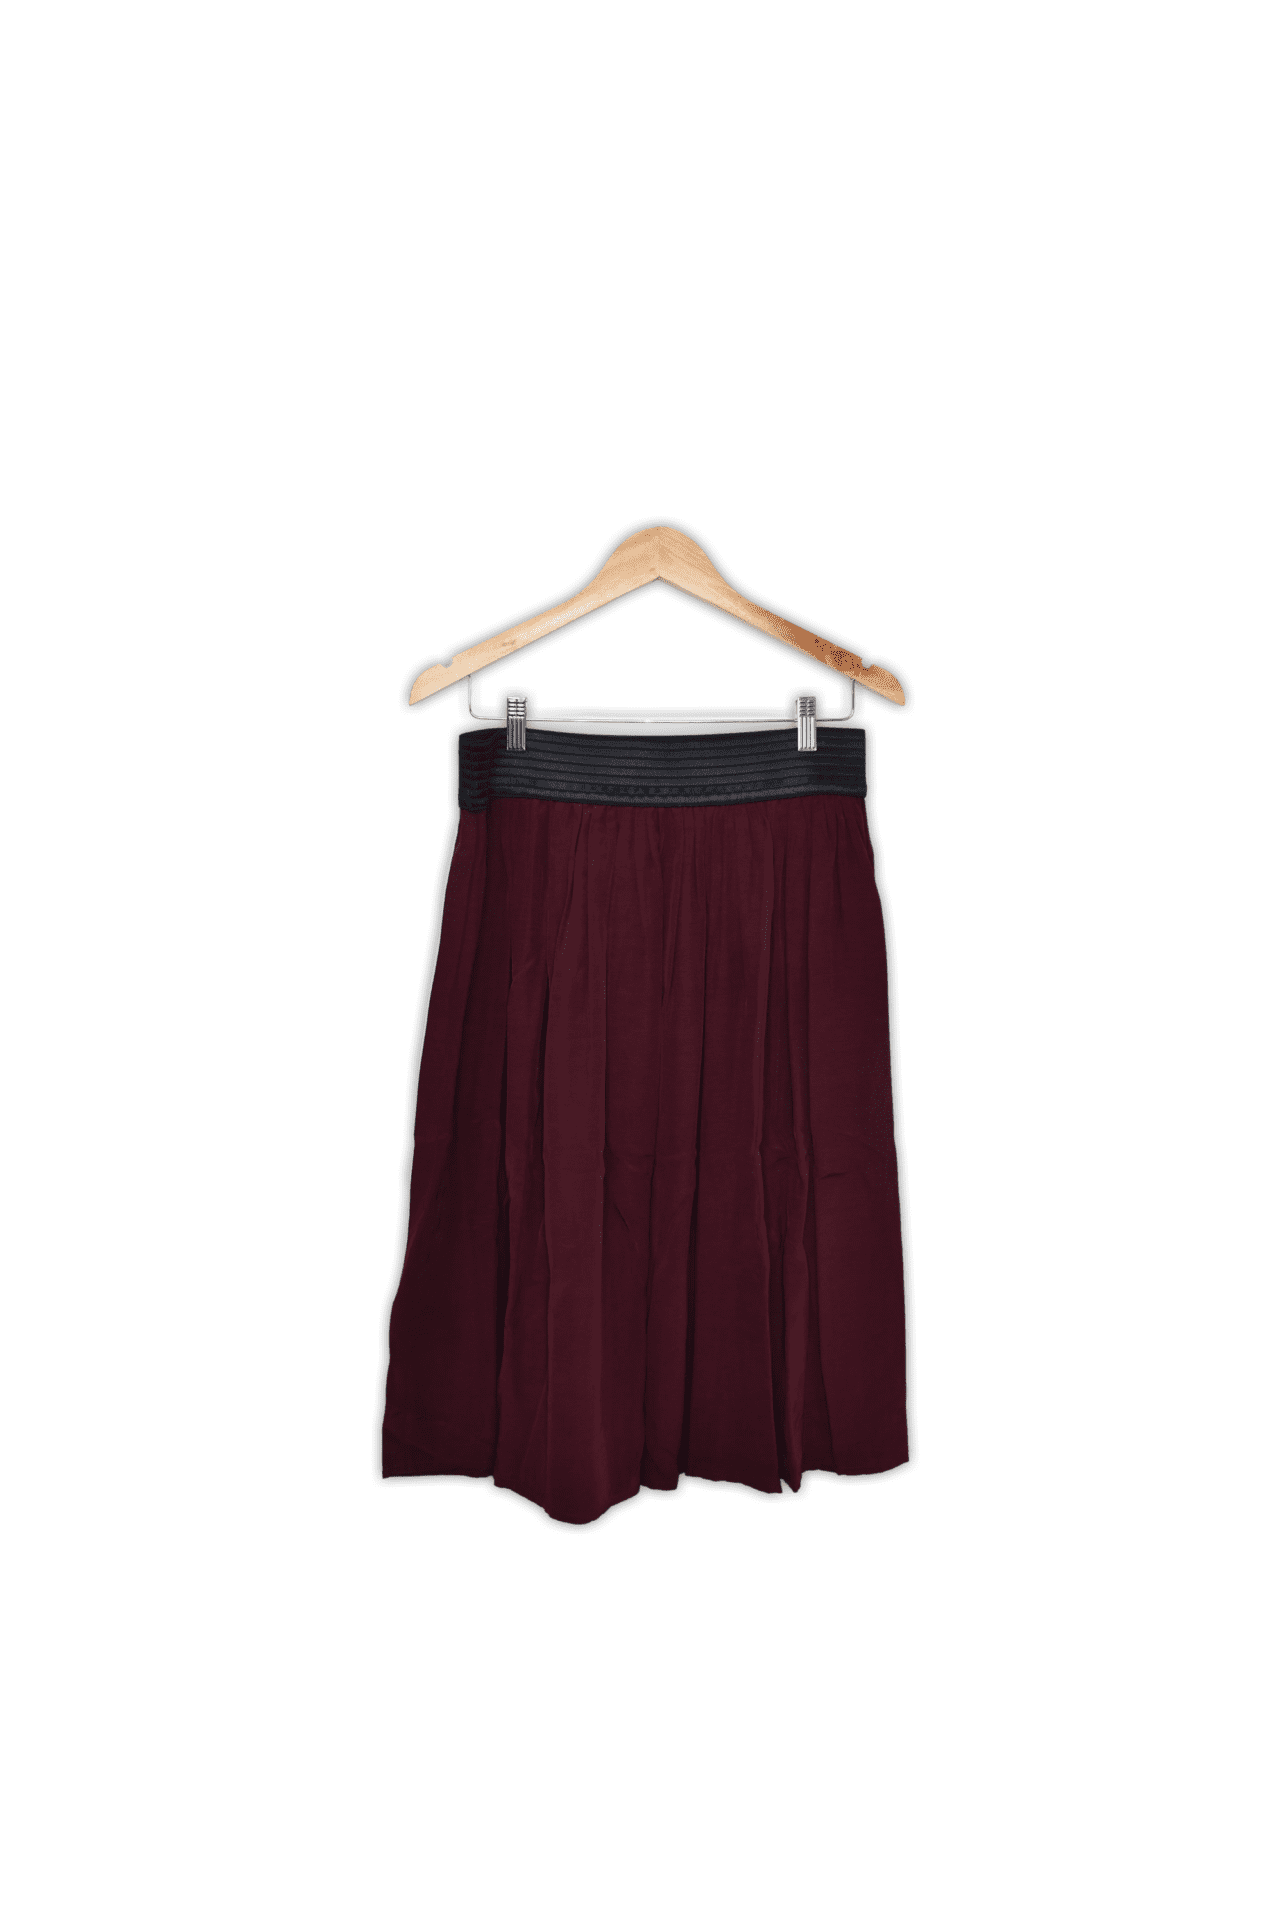 Cooper knee length skirt with gathered fullness and an elasticated waist band.  Small, Deep Red, Viscose